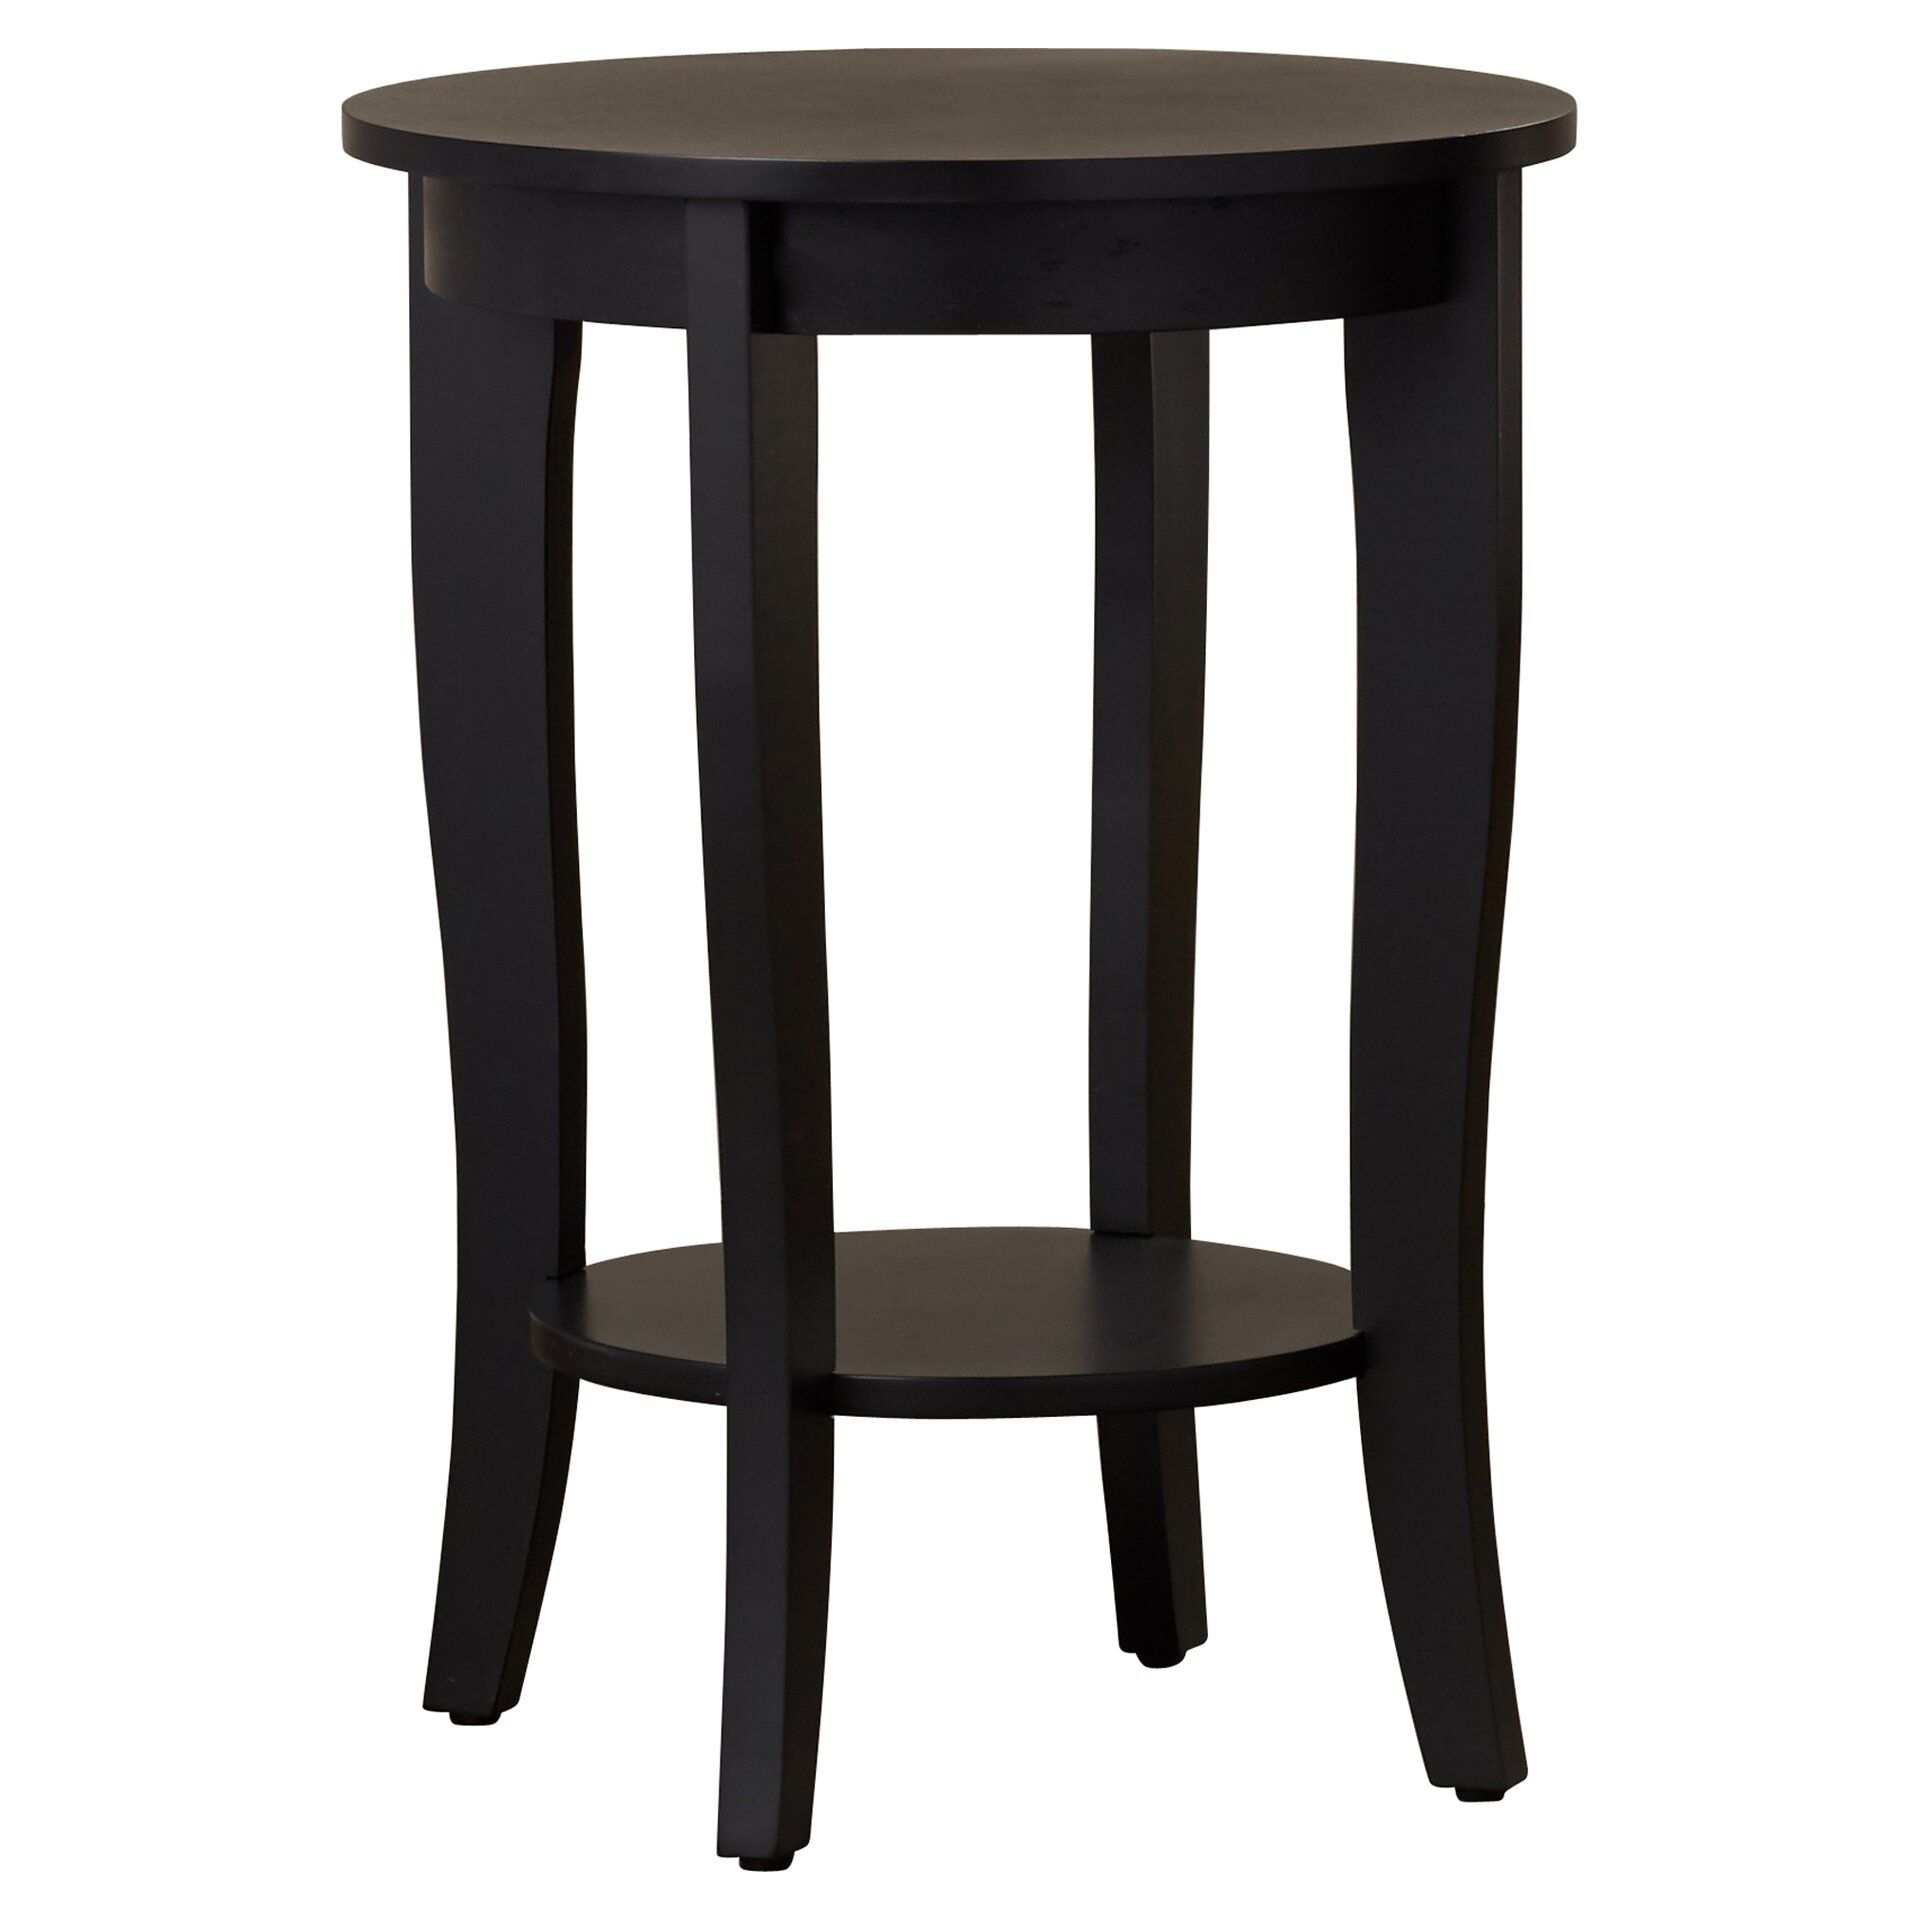 Convenience Concepts American Heritage Round Table & Reviews | Wayfair For American Heritage Round Coffee Tables (View 6 of 20)